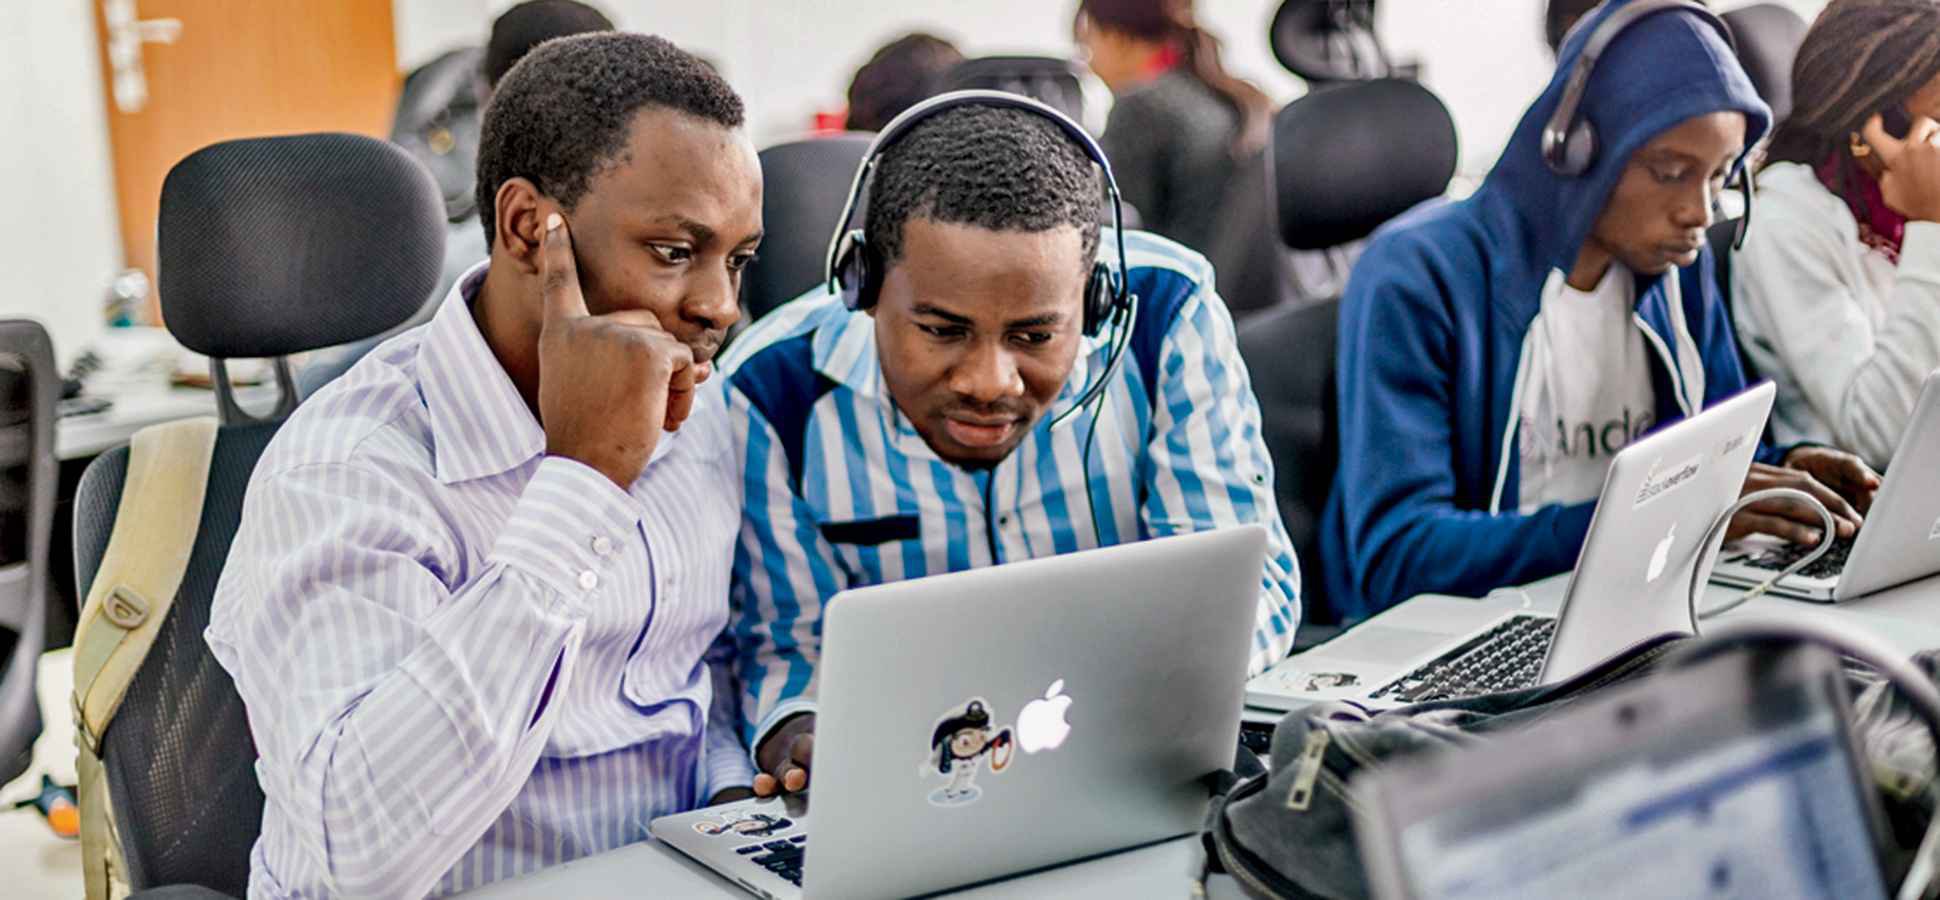 Africa is the world’s fastest-growing continent for software developers